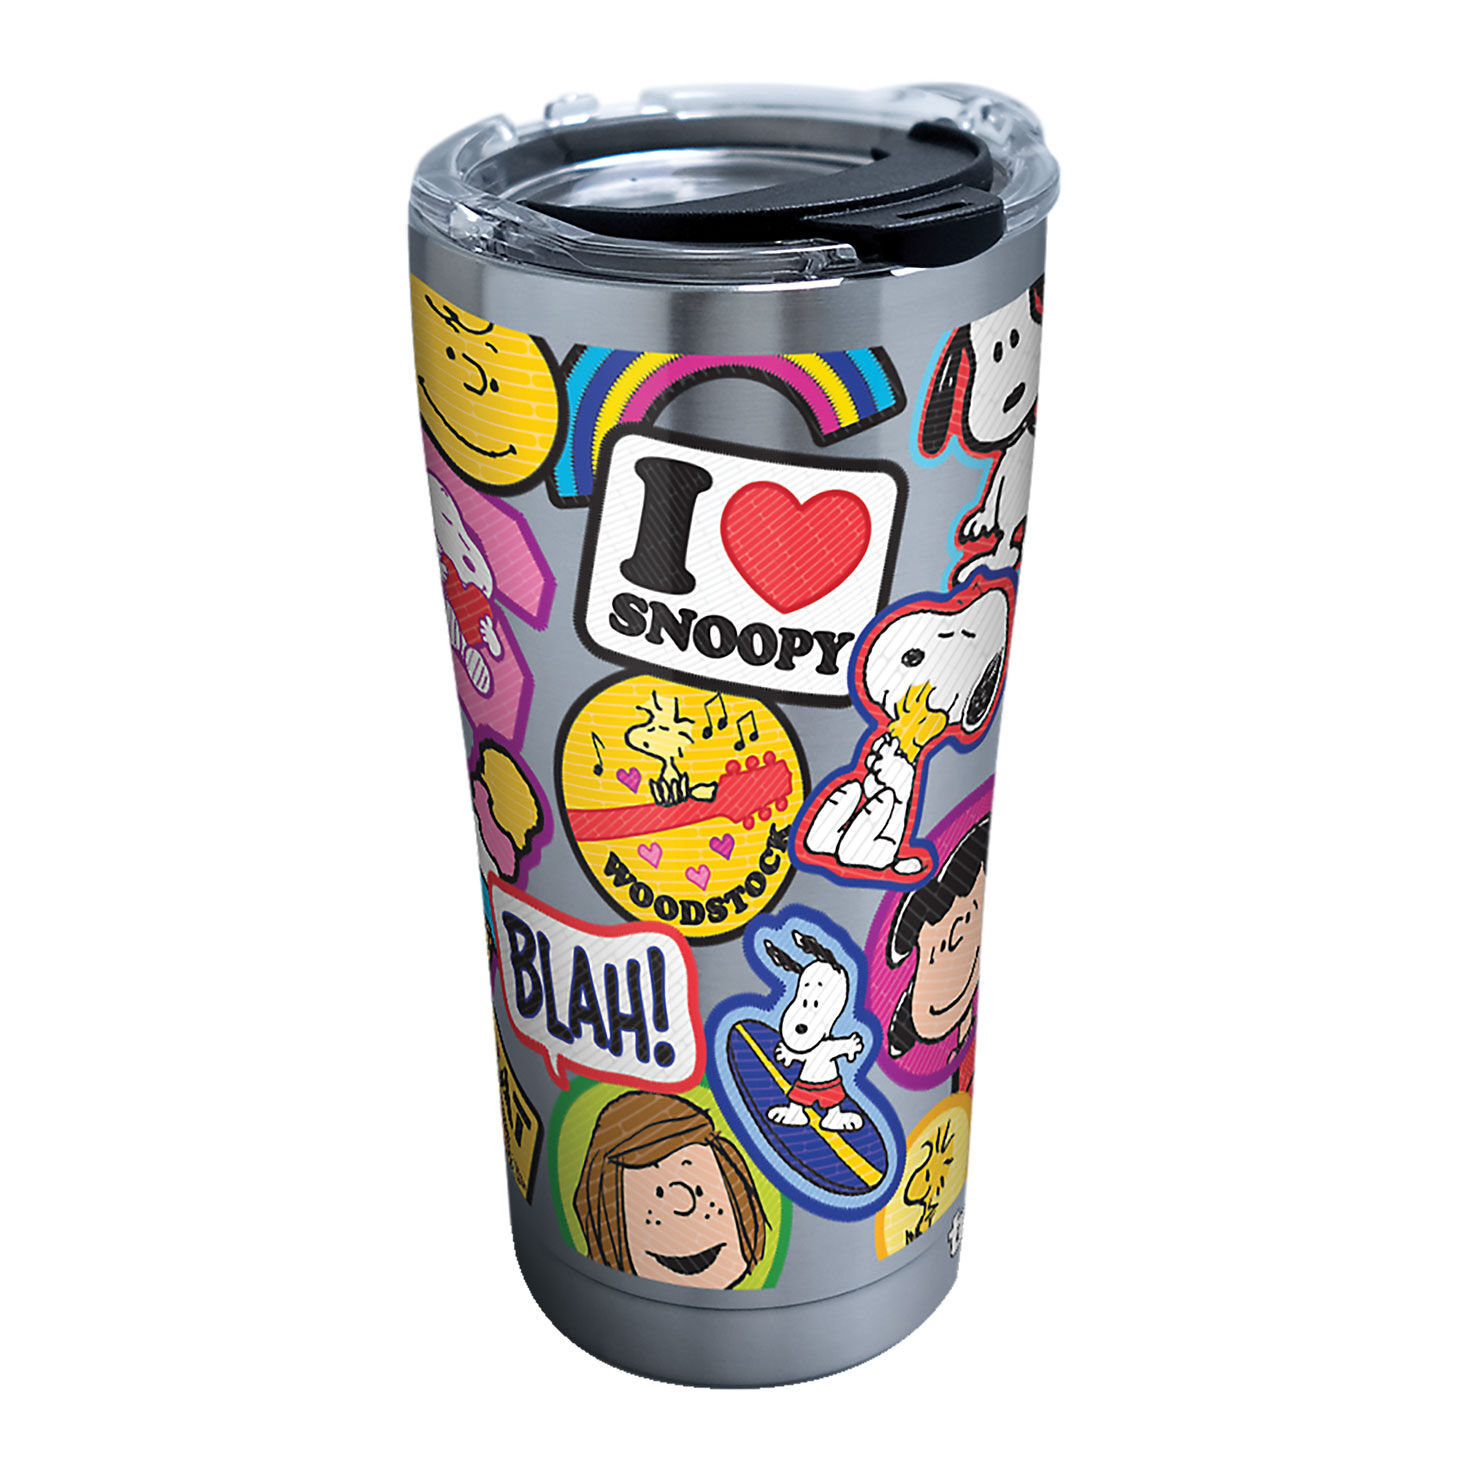 https://www.hallmark.com/dw/image/v2/AALB_PRD/on/demandware.static/-/Sites-hallmark-master/default/dwd2be7b3c/images/finished-goods/products/1301552/Tervis-Peanuts-Collage-Insulated-Stainless-Steel-Cup_1301552_01.jpg?sfrm=jpg